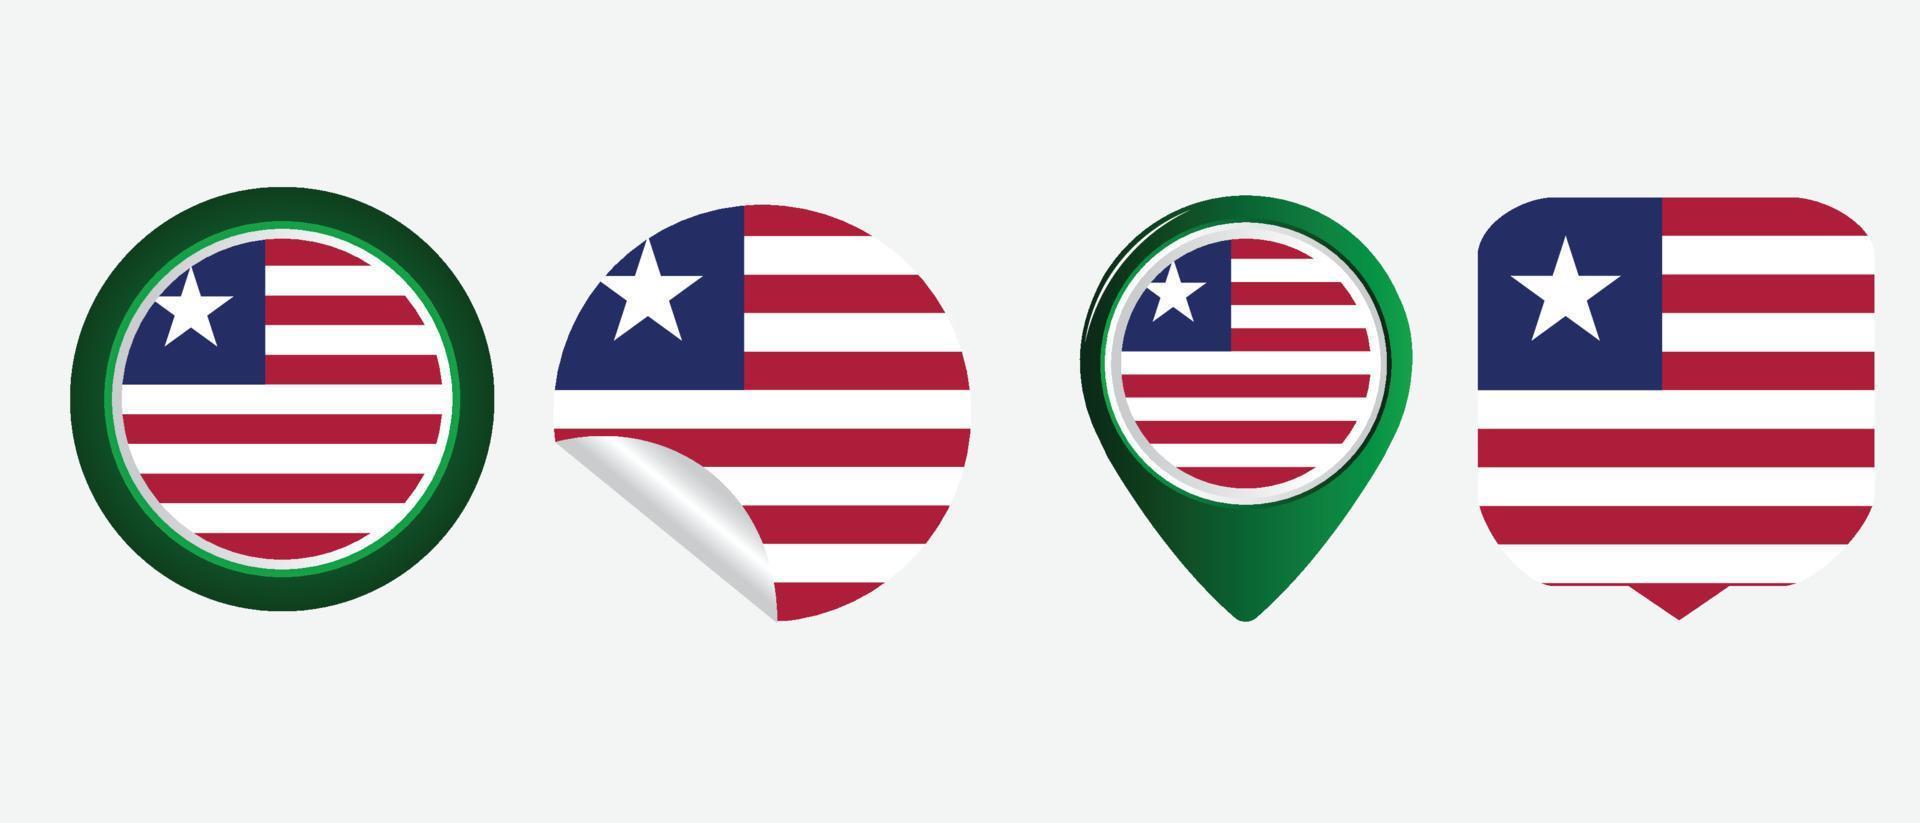 Liberia flag icon . web icon set . icons collection flat. Simple vector illustration.